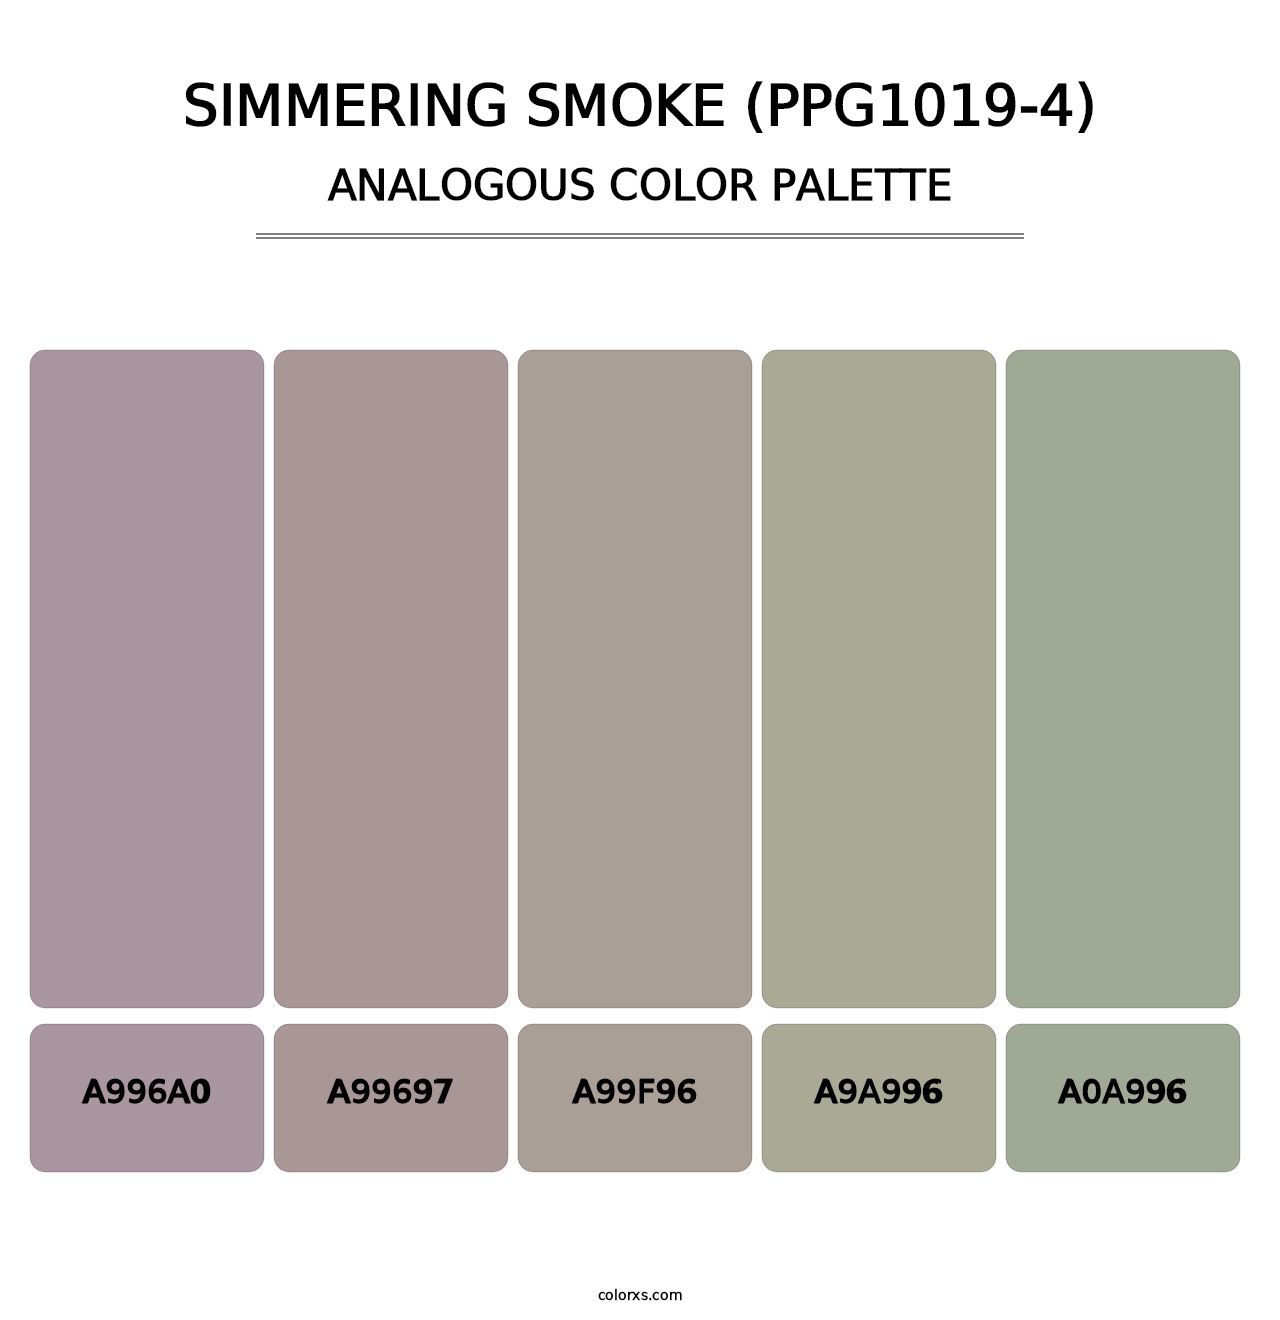 Simmering Smoke (PPG1019-4) - Analogous Color Palette